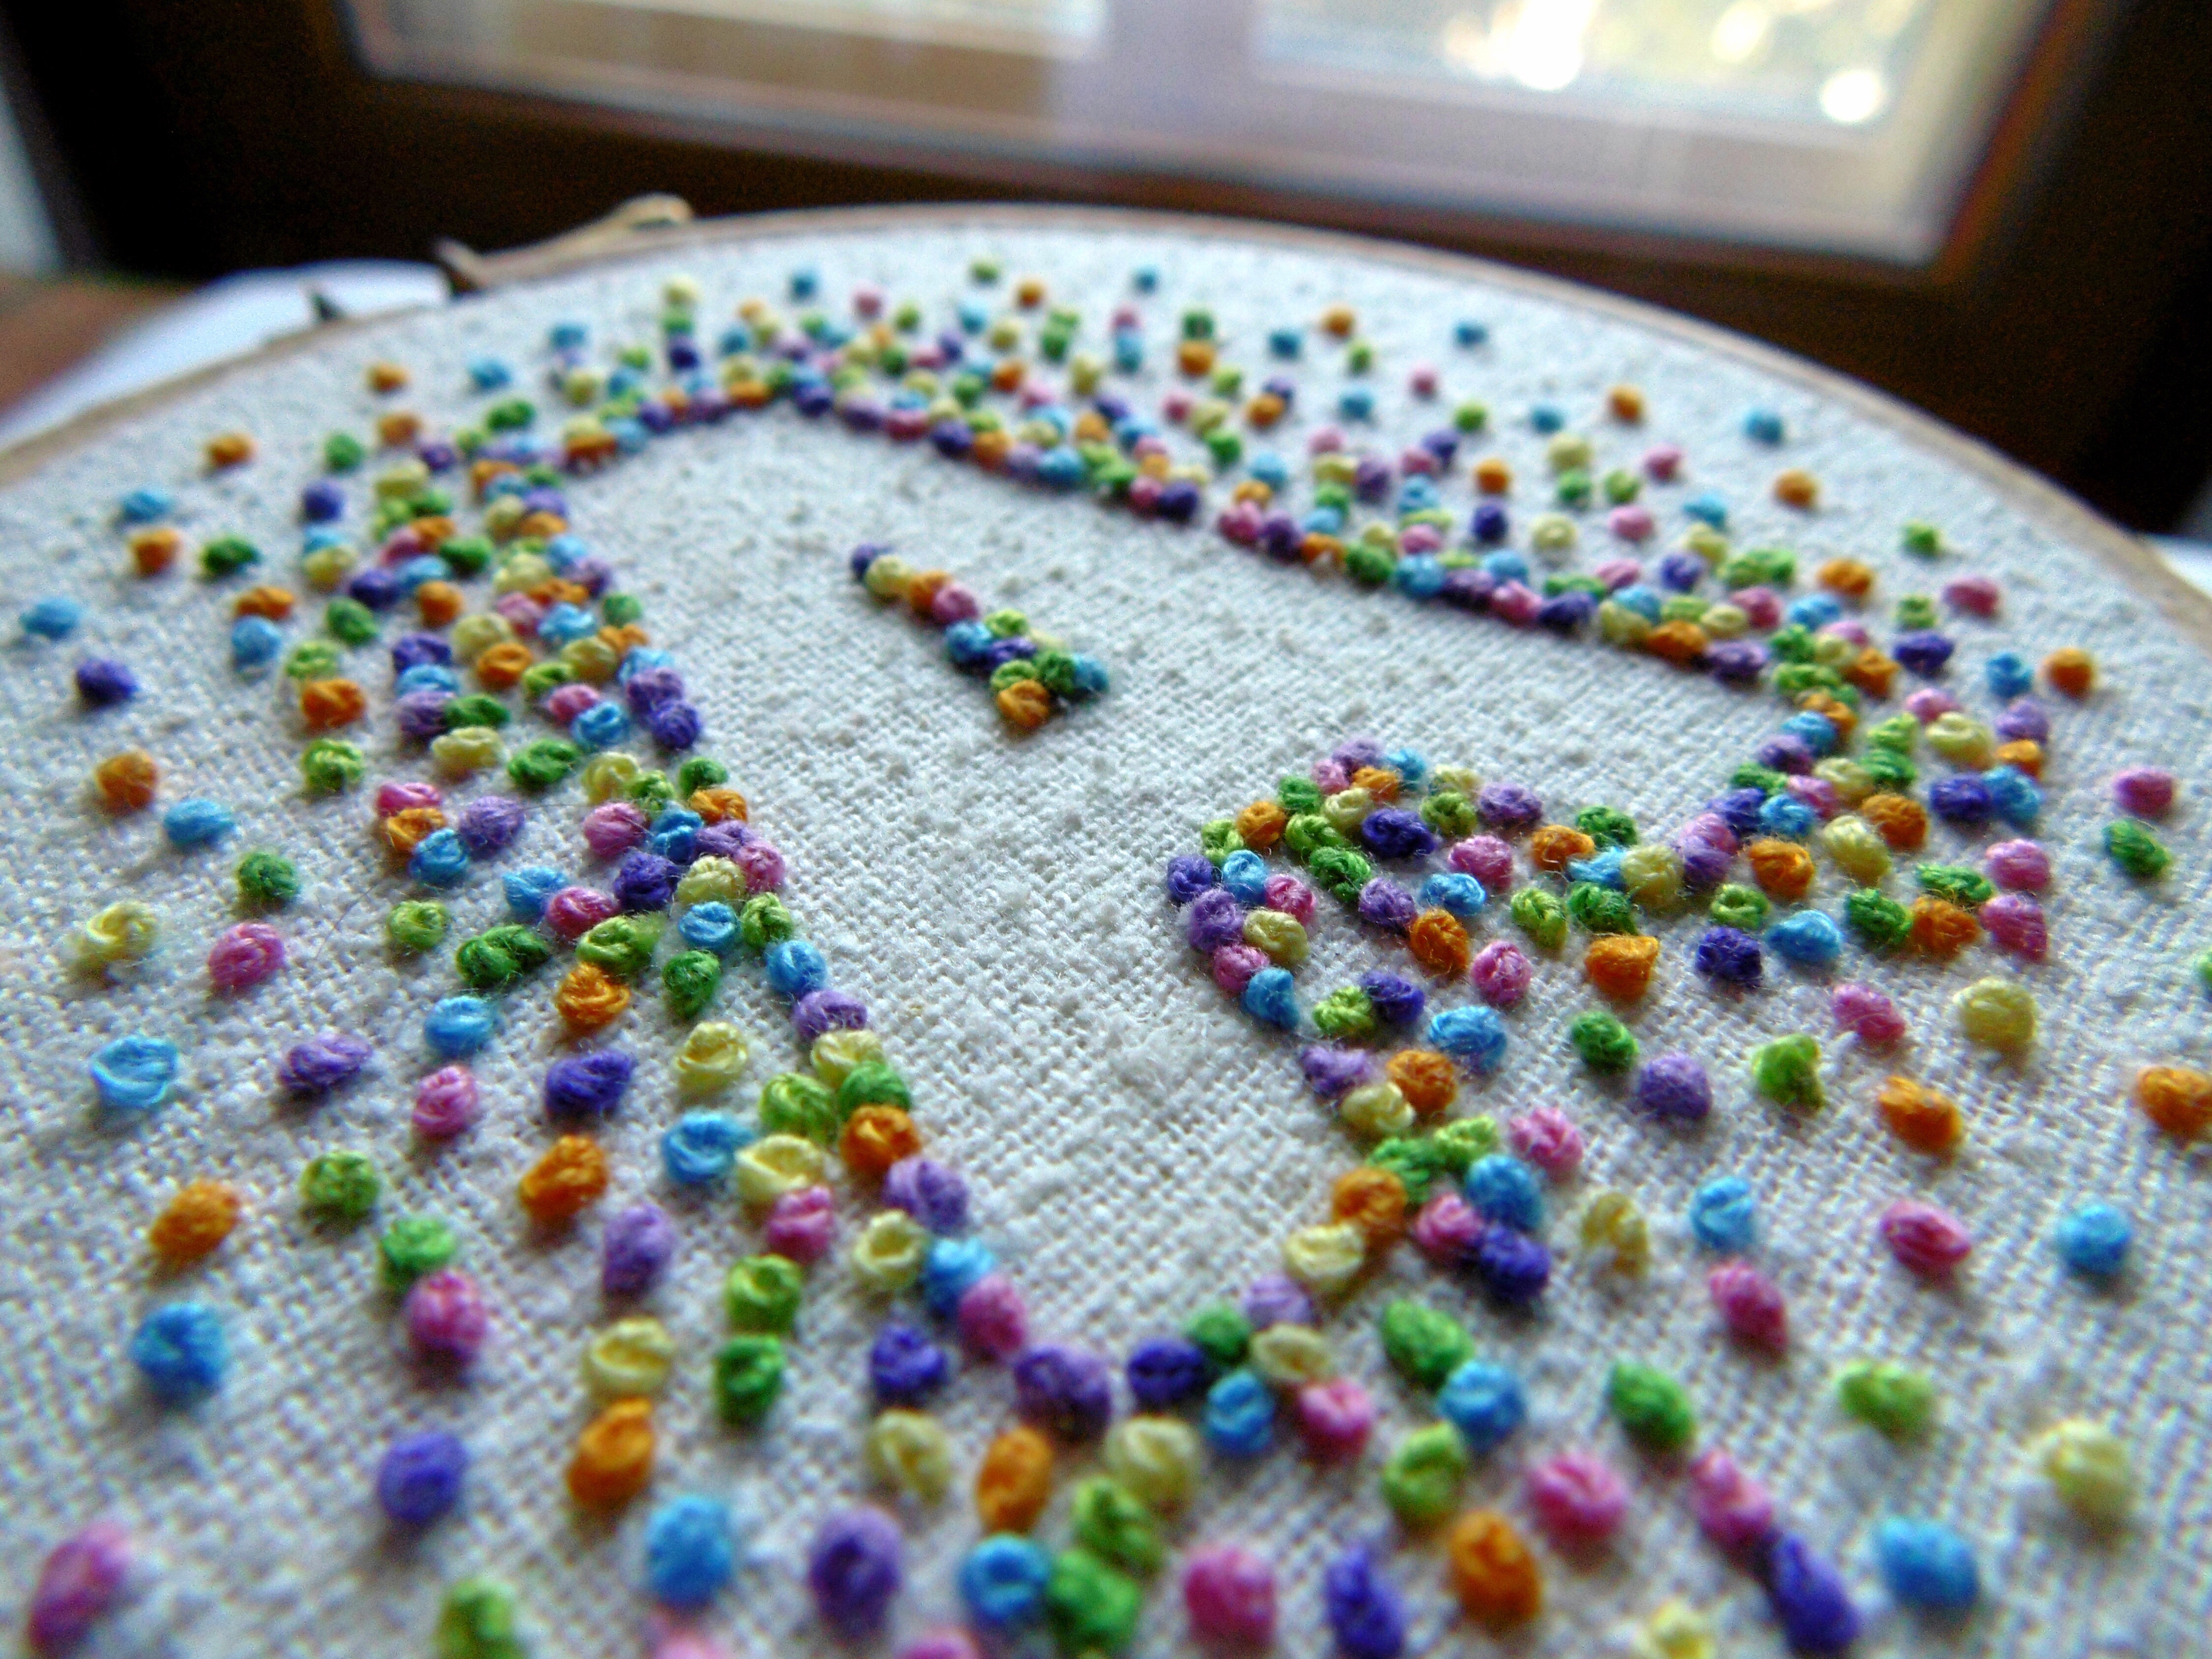 French Knot Embroidery Patterns A Project That Will Make You Love French Knots Ambrosia Stitches